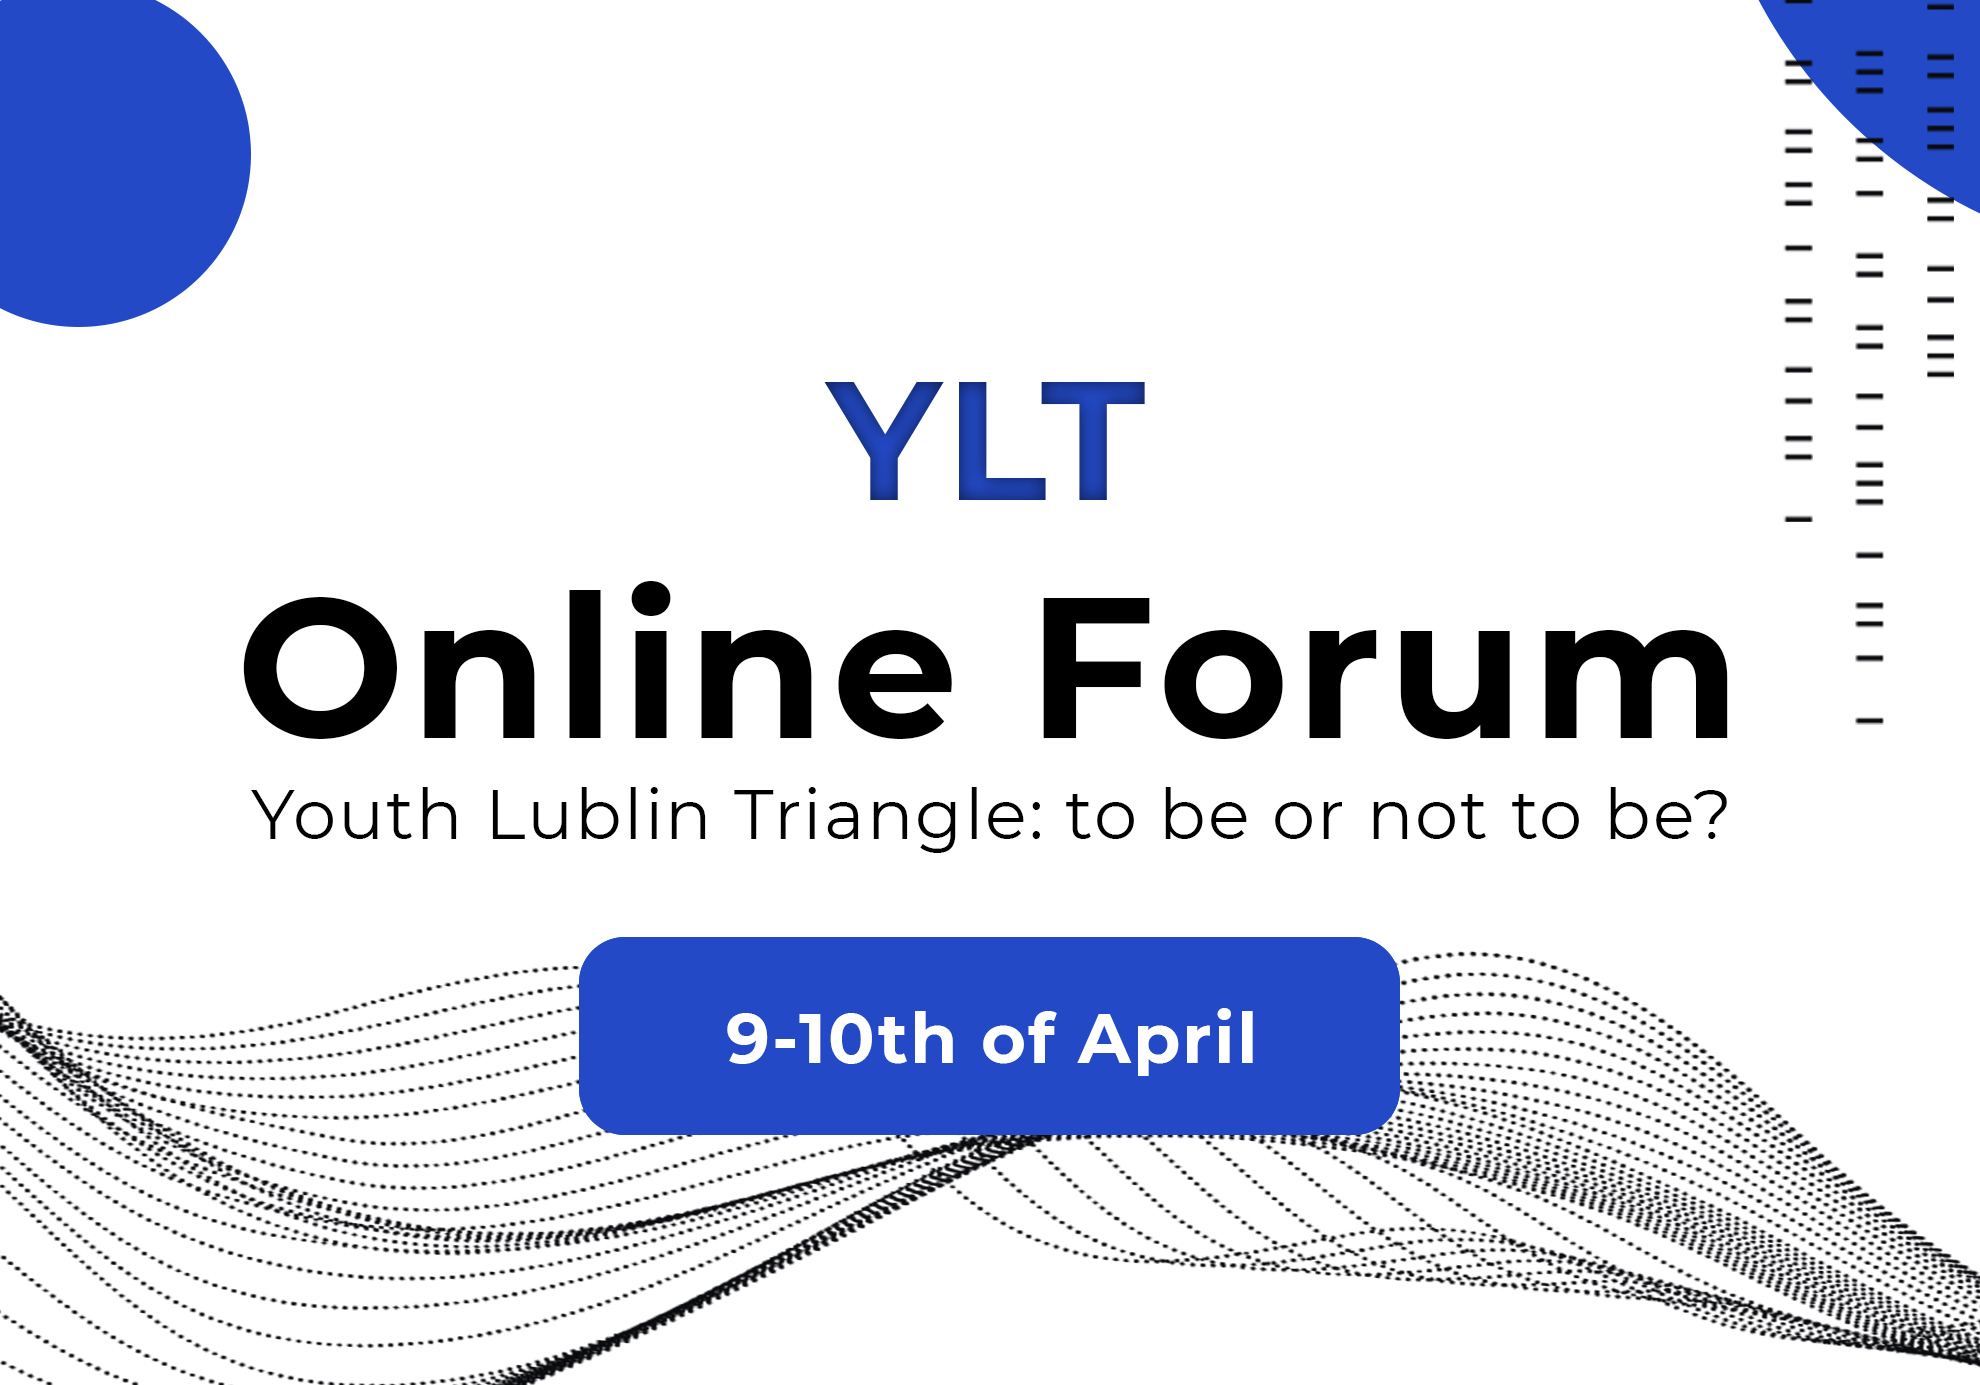 Youth Lublin Triangle Forum